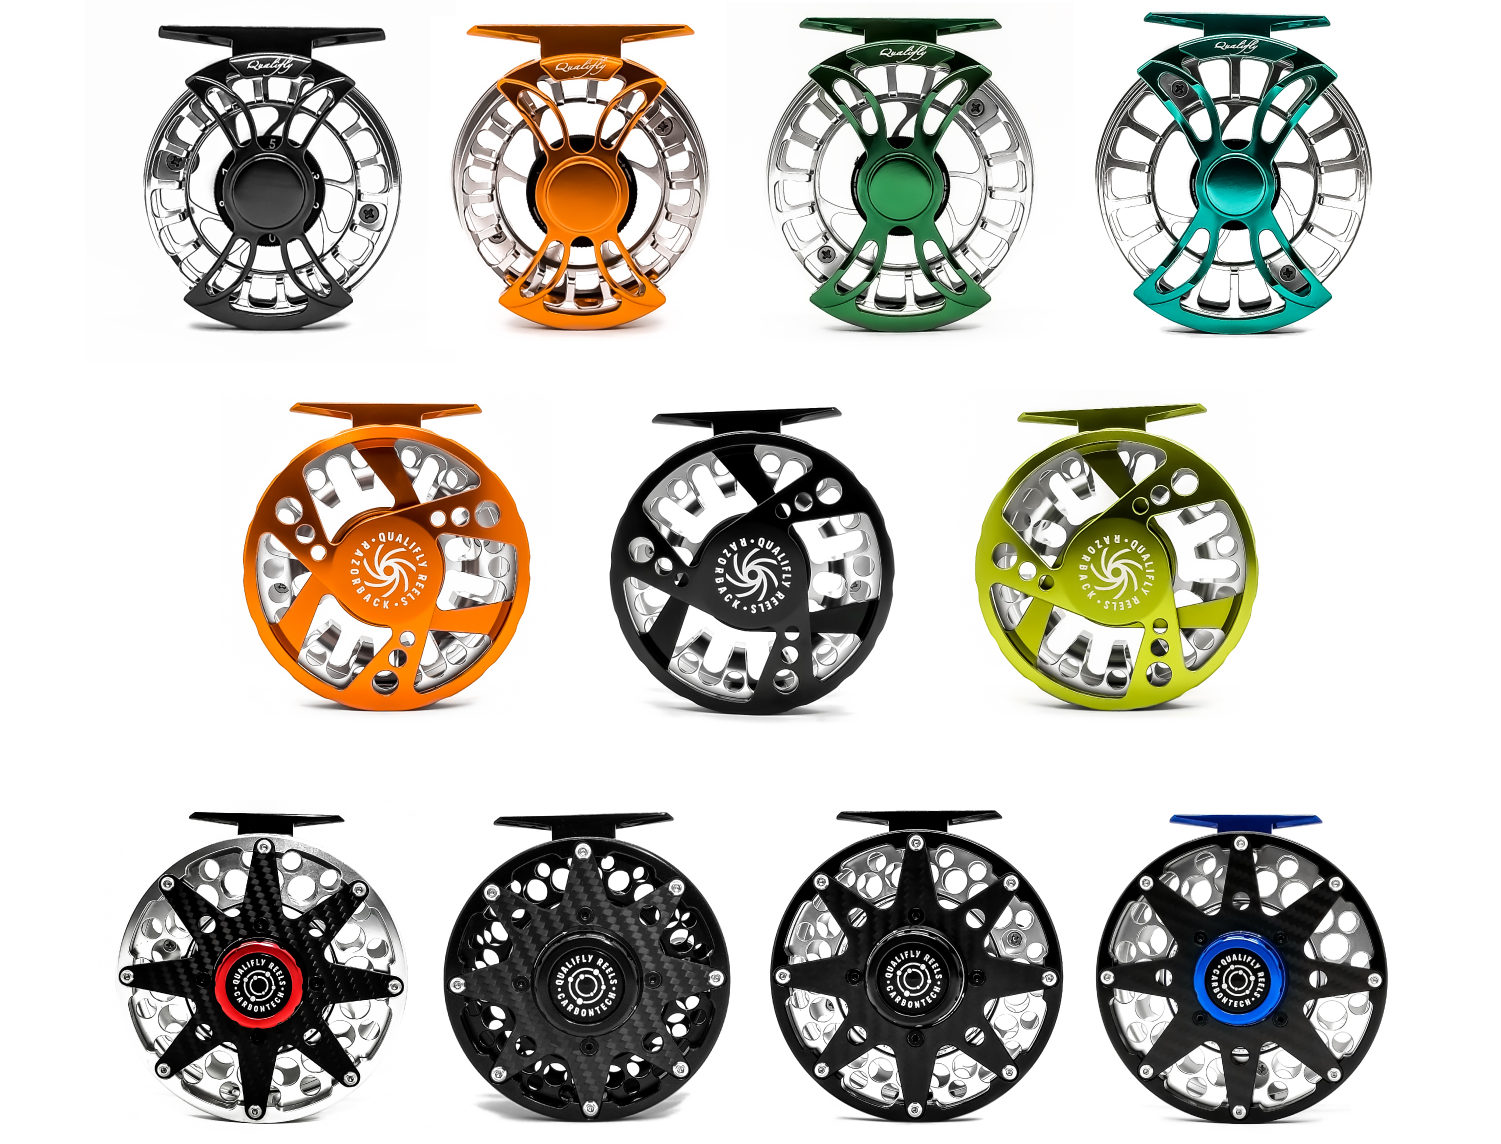 Qualifly Reels: Engineered to Fish - Casting Across